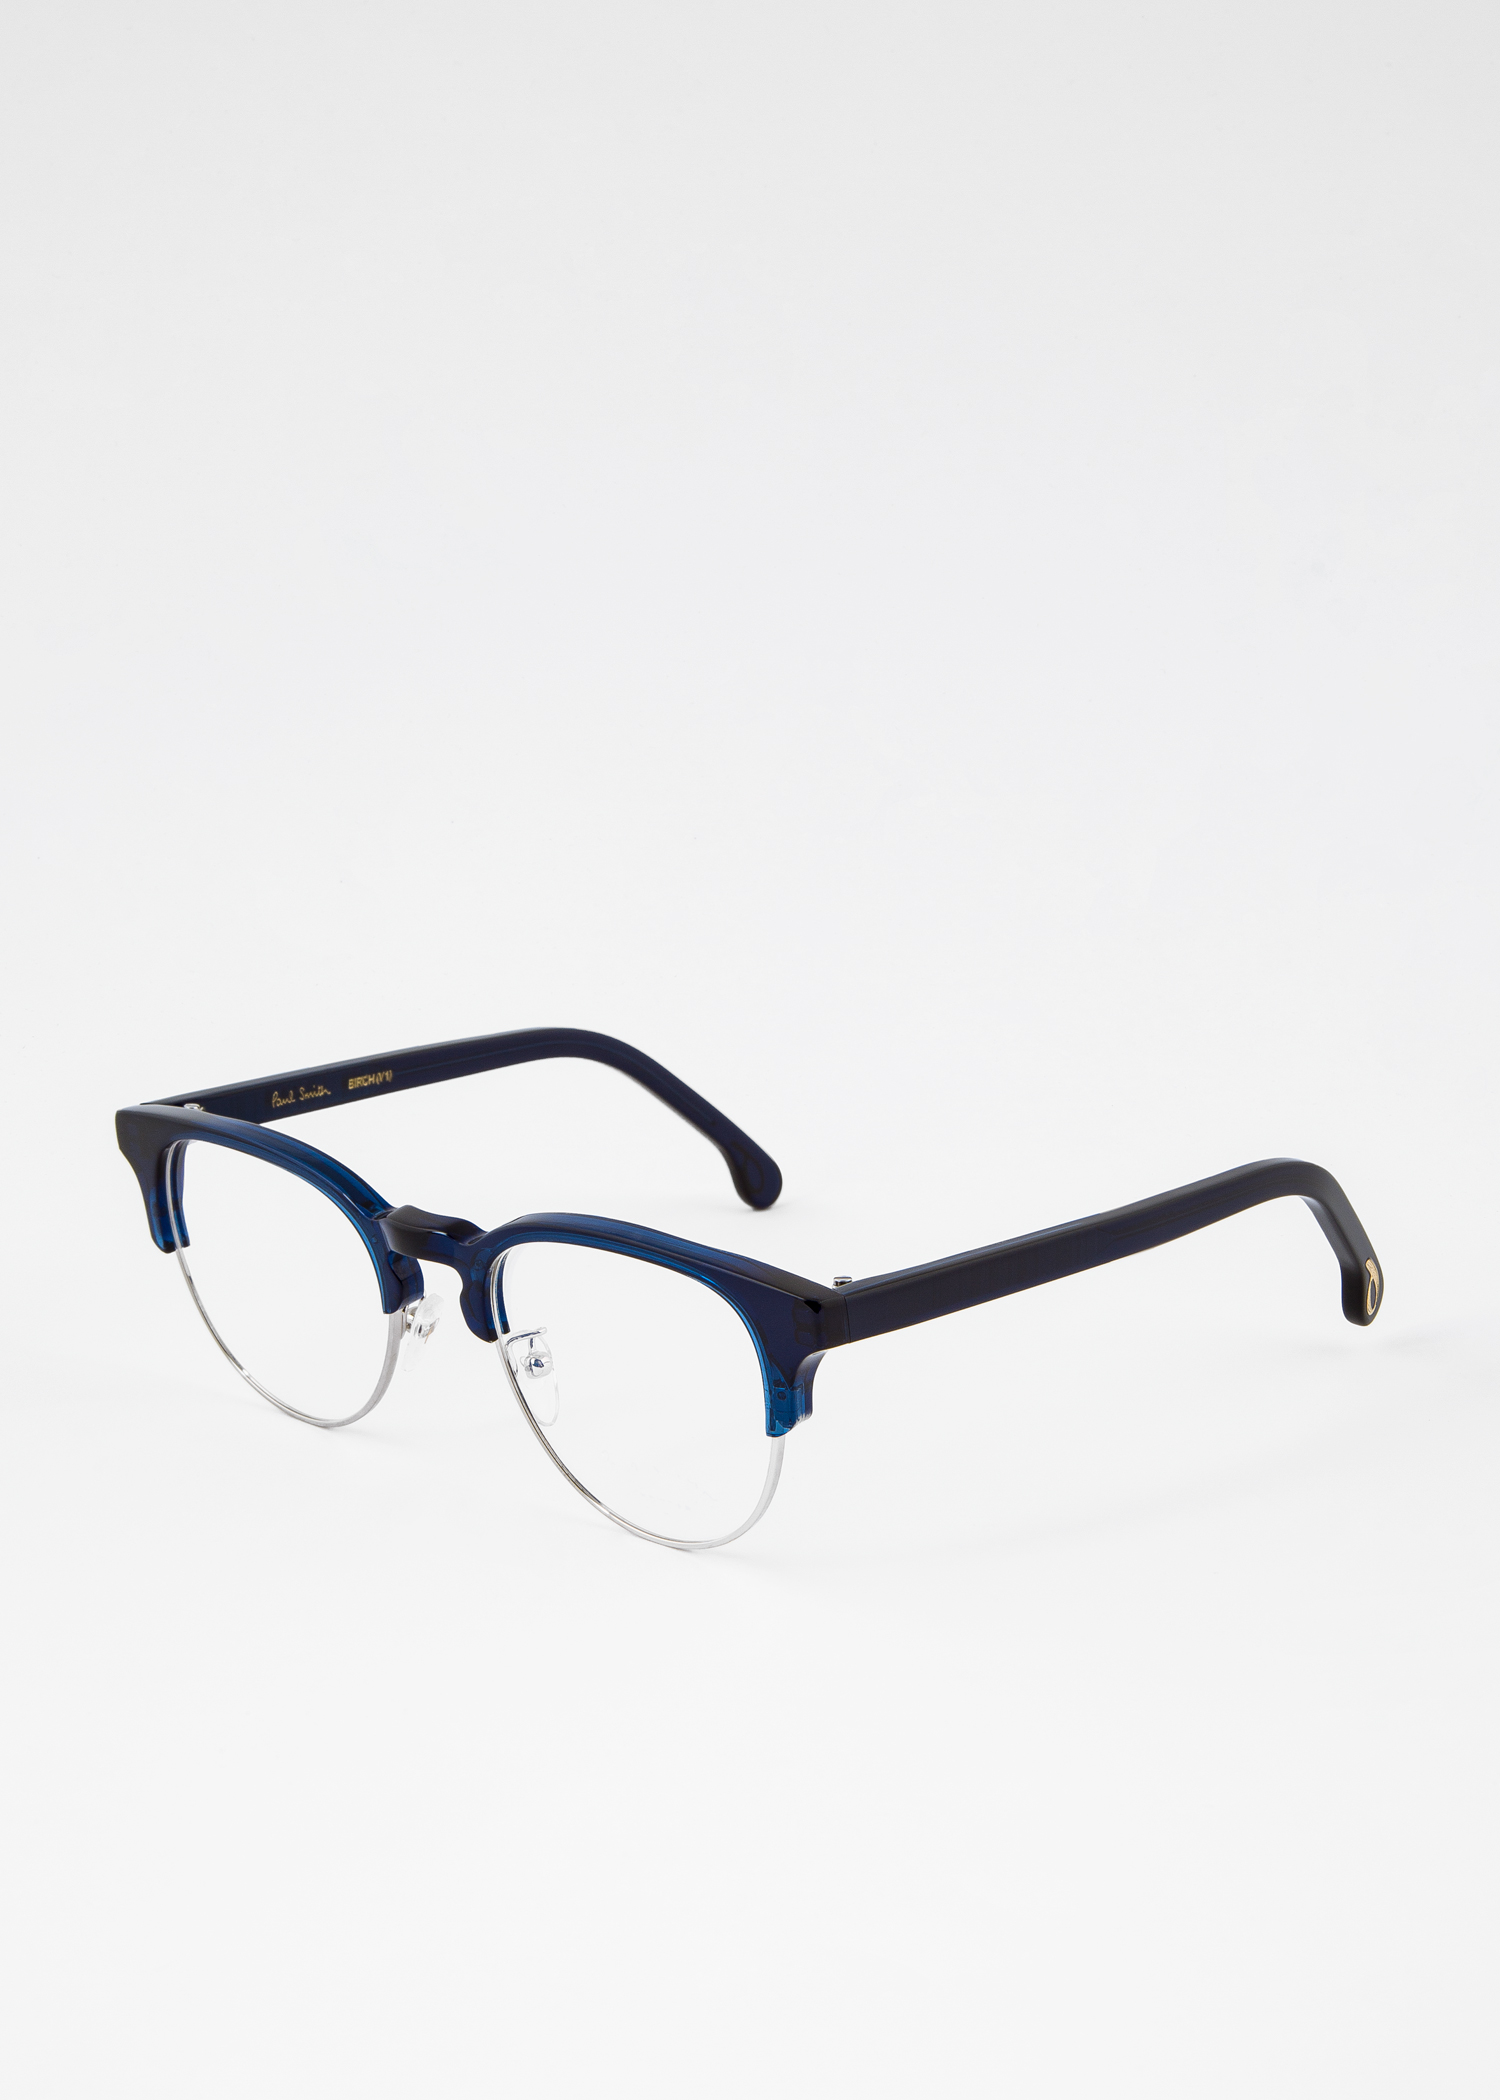 Angled view - Paul Smith Deep Navy 'Birch' Spectacles